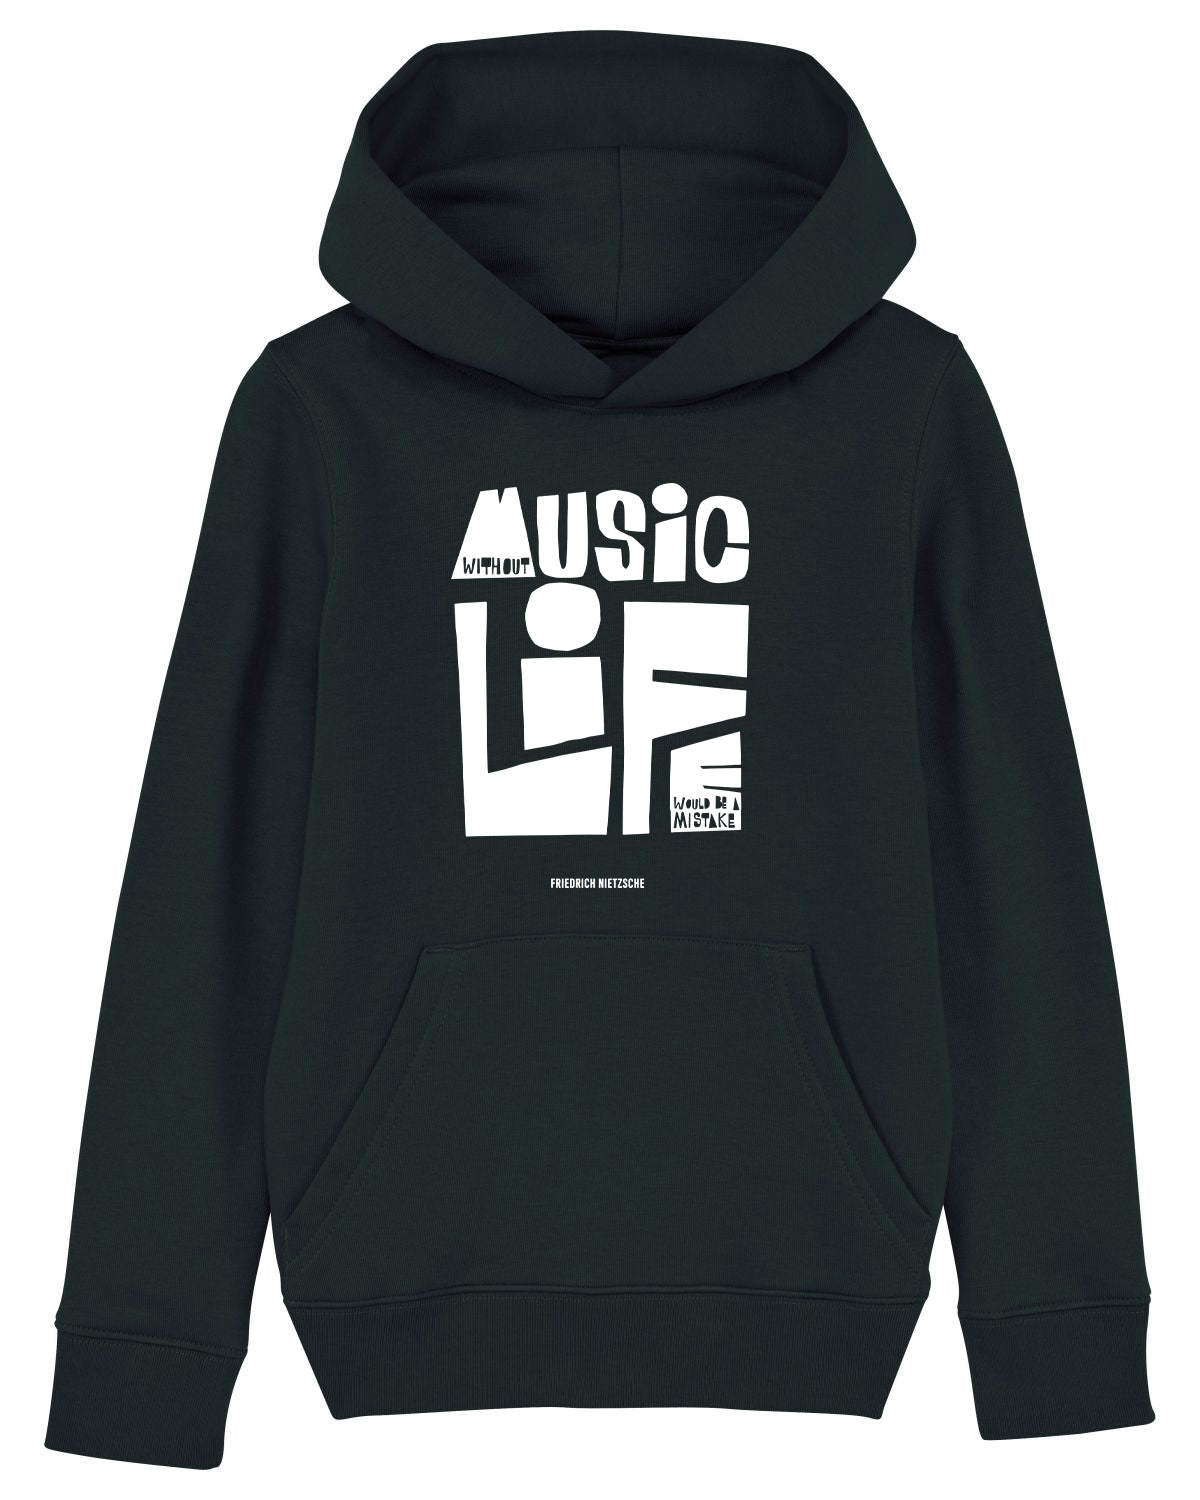 'Without Music Life Would Be A Mistake' Organic Adult Unisex Hoodie